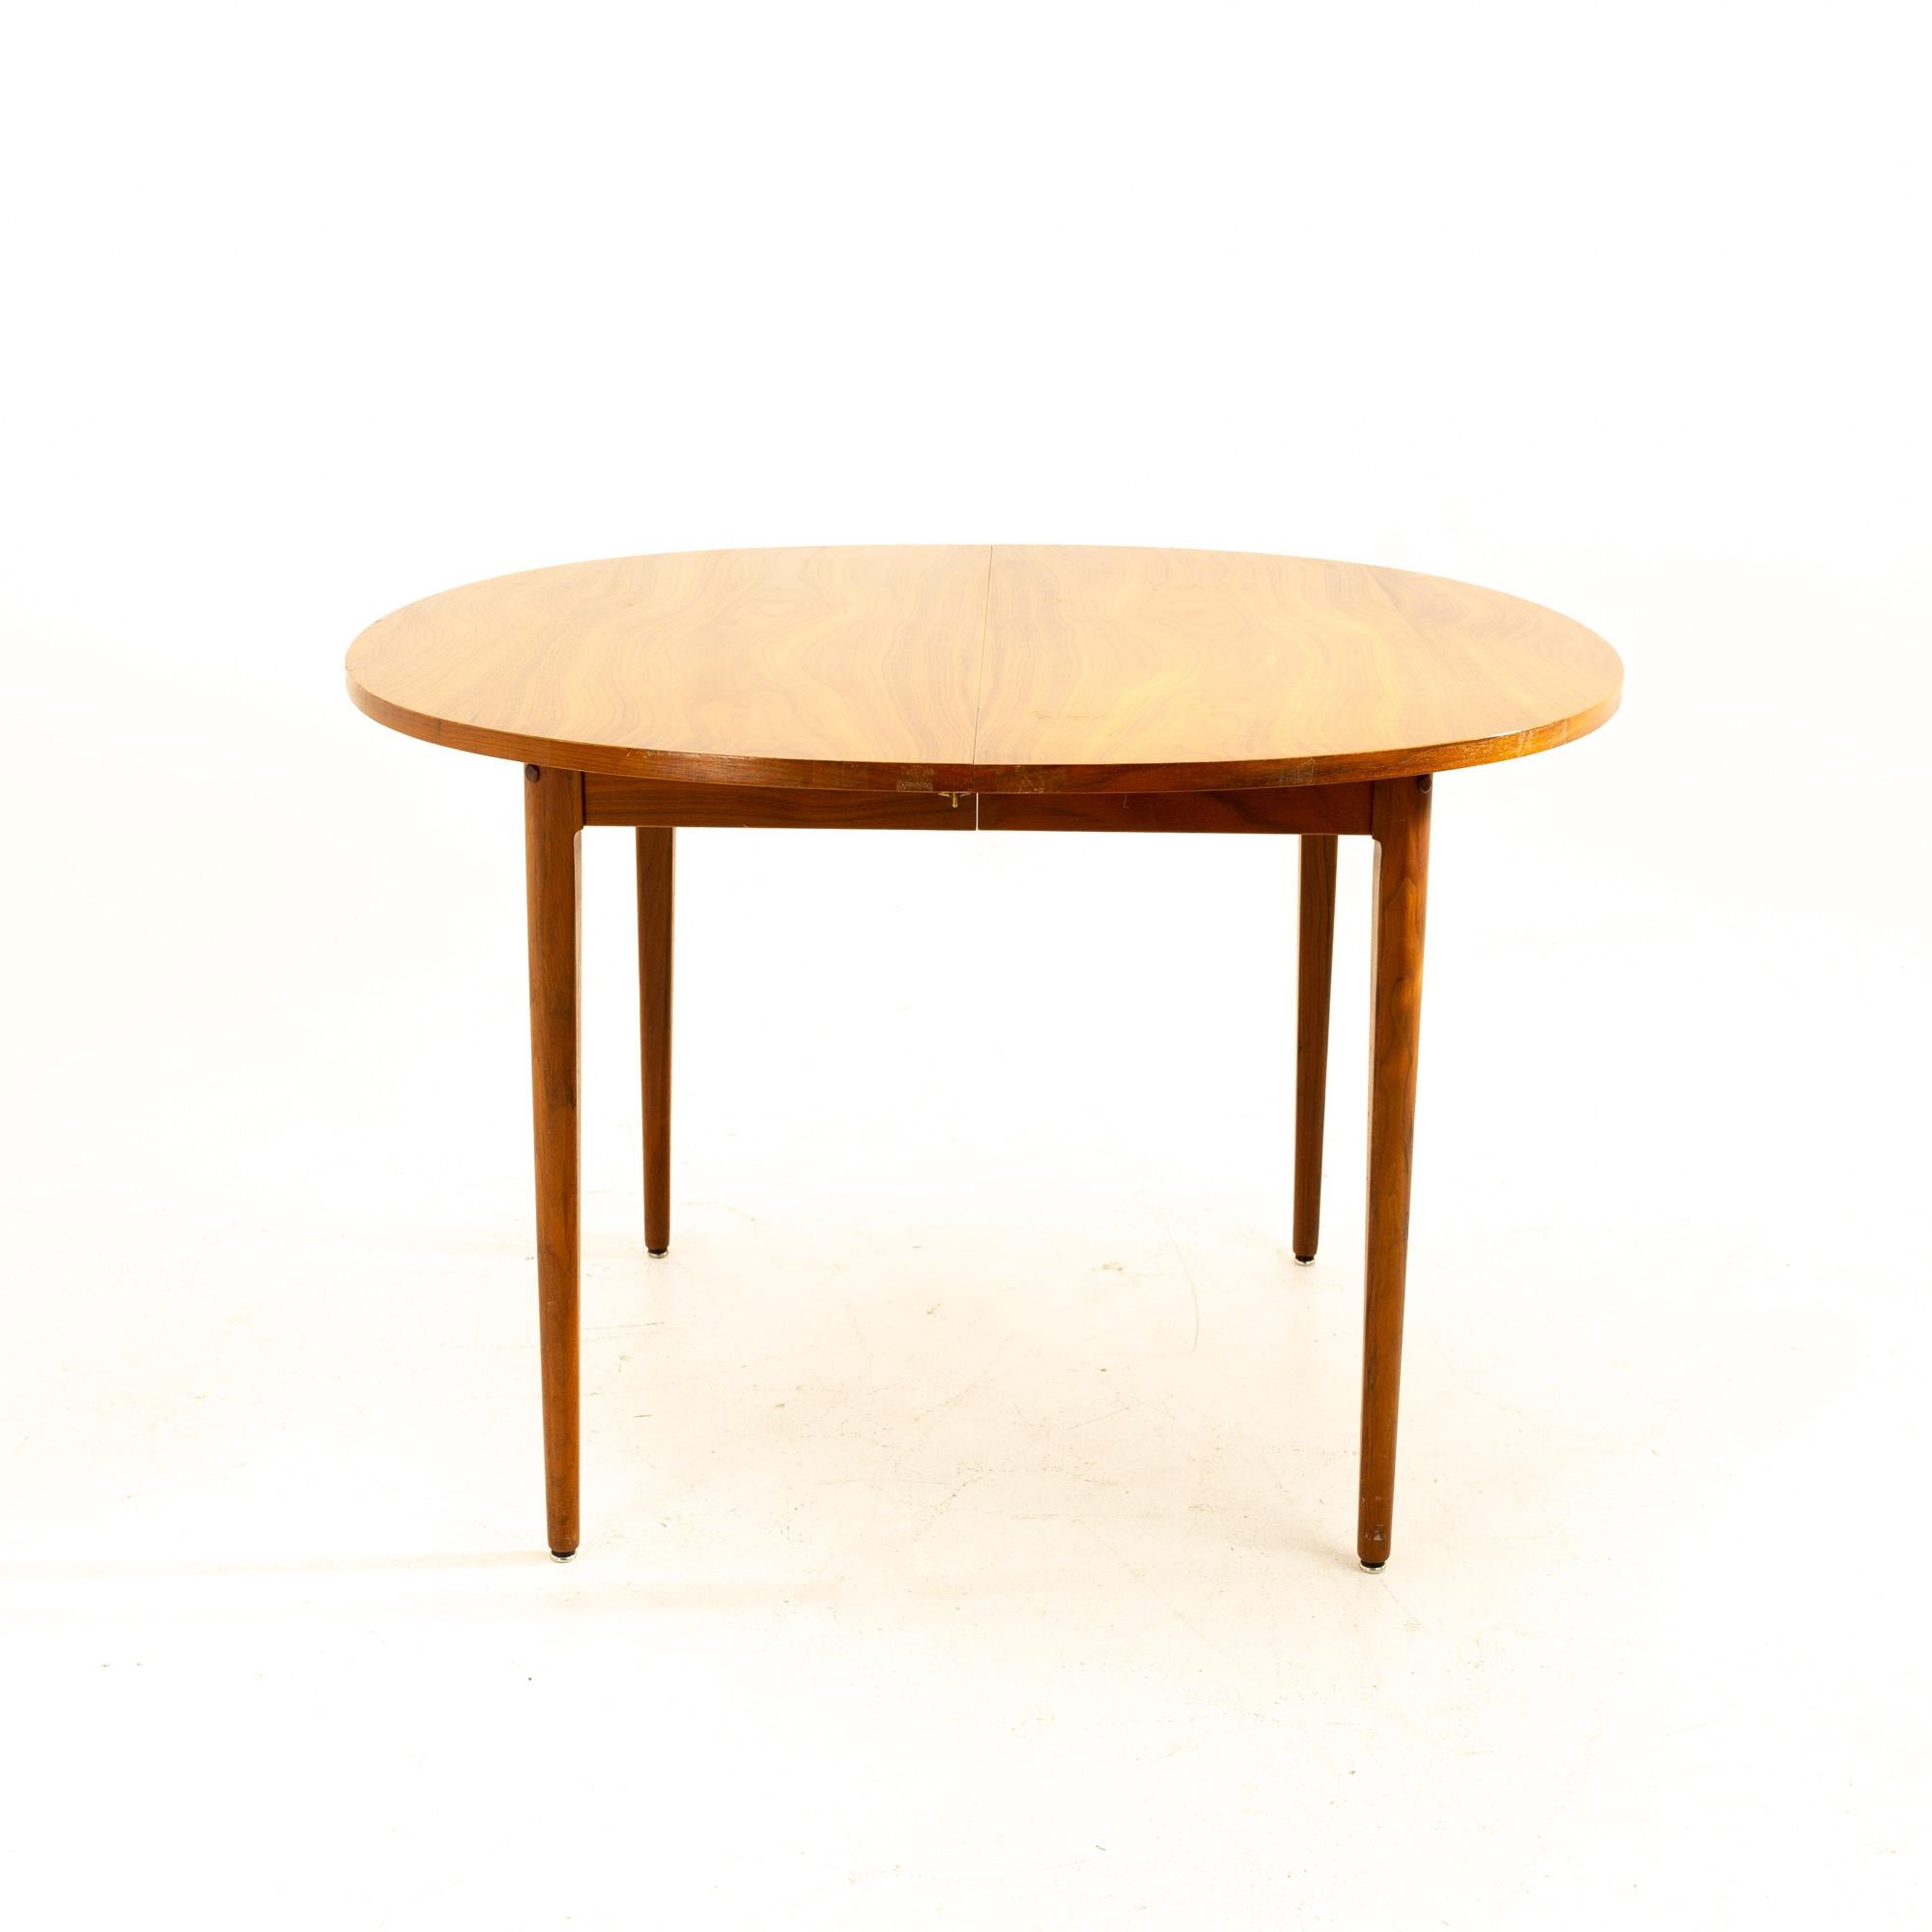 Kipp Stewart for Drexel Declaration mid century expanding round walnut dining table with 2 leaves

Table measures: 44.25 wide x 44.25 deep x 29.25 high, with a chair clearance of 26.5 inches, each leaf is 22 inches wide, making a maximum table width